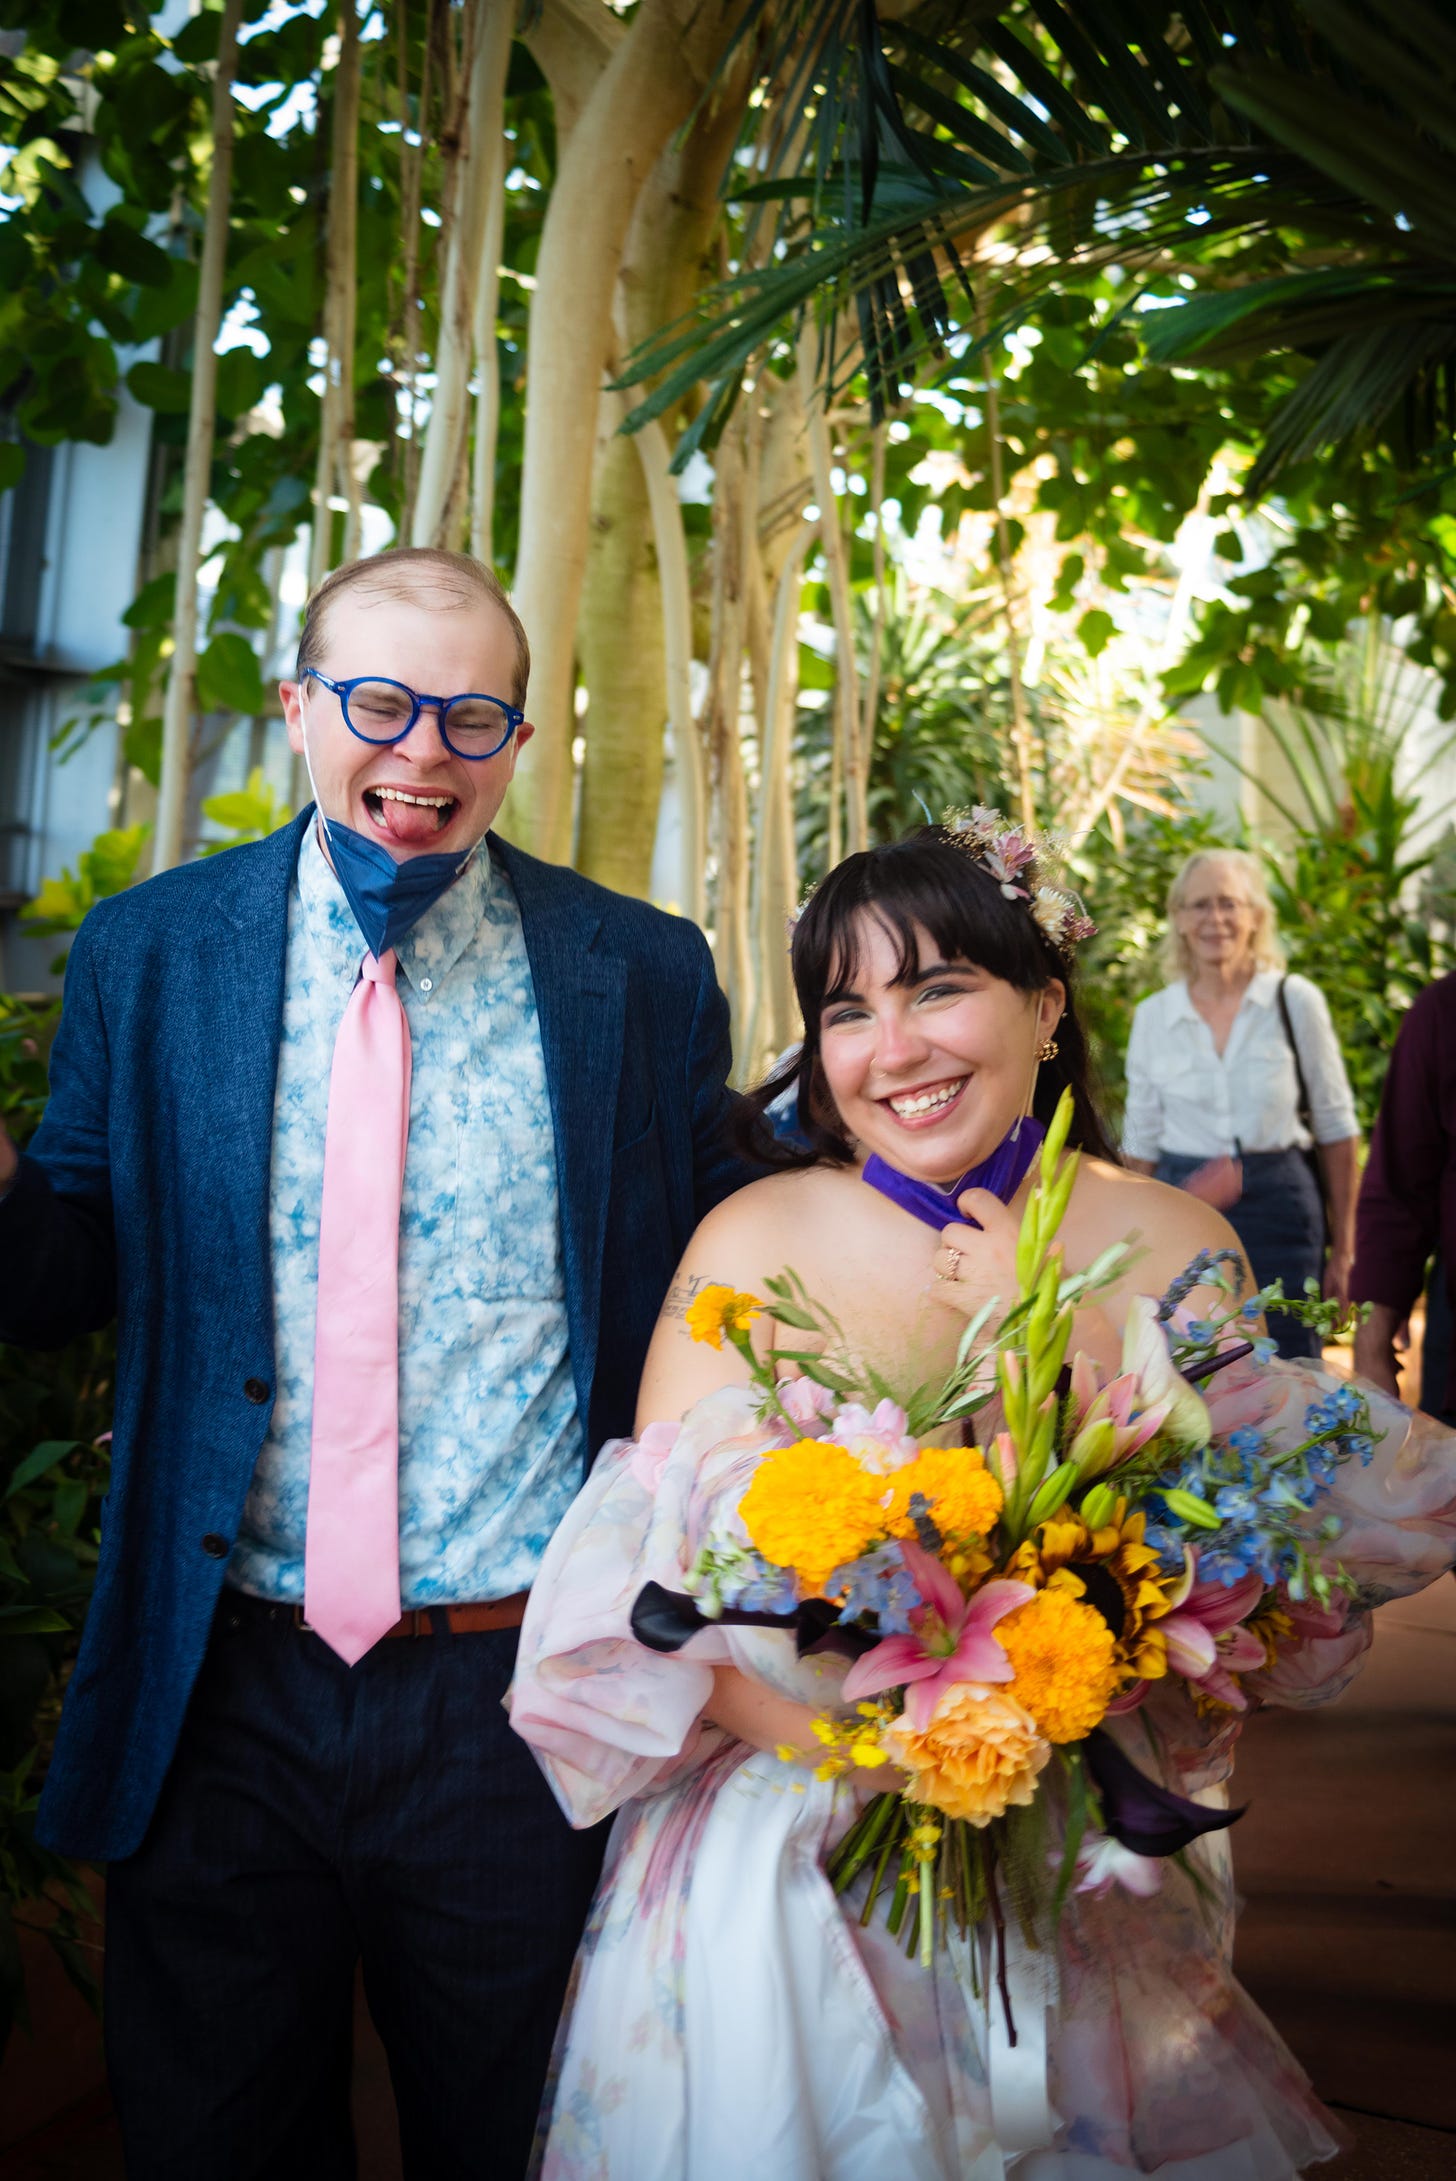 Daniella and Joe making silly faces while taking wedding photos at Garfield Park Conservatory.